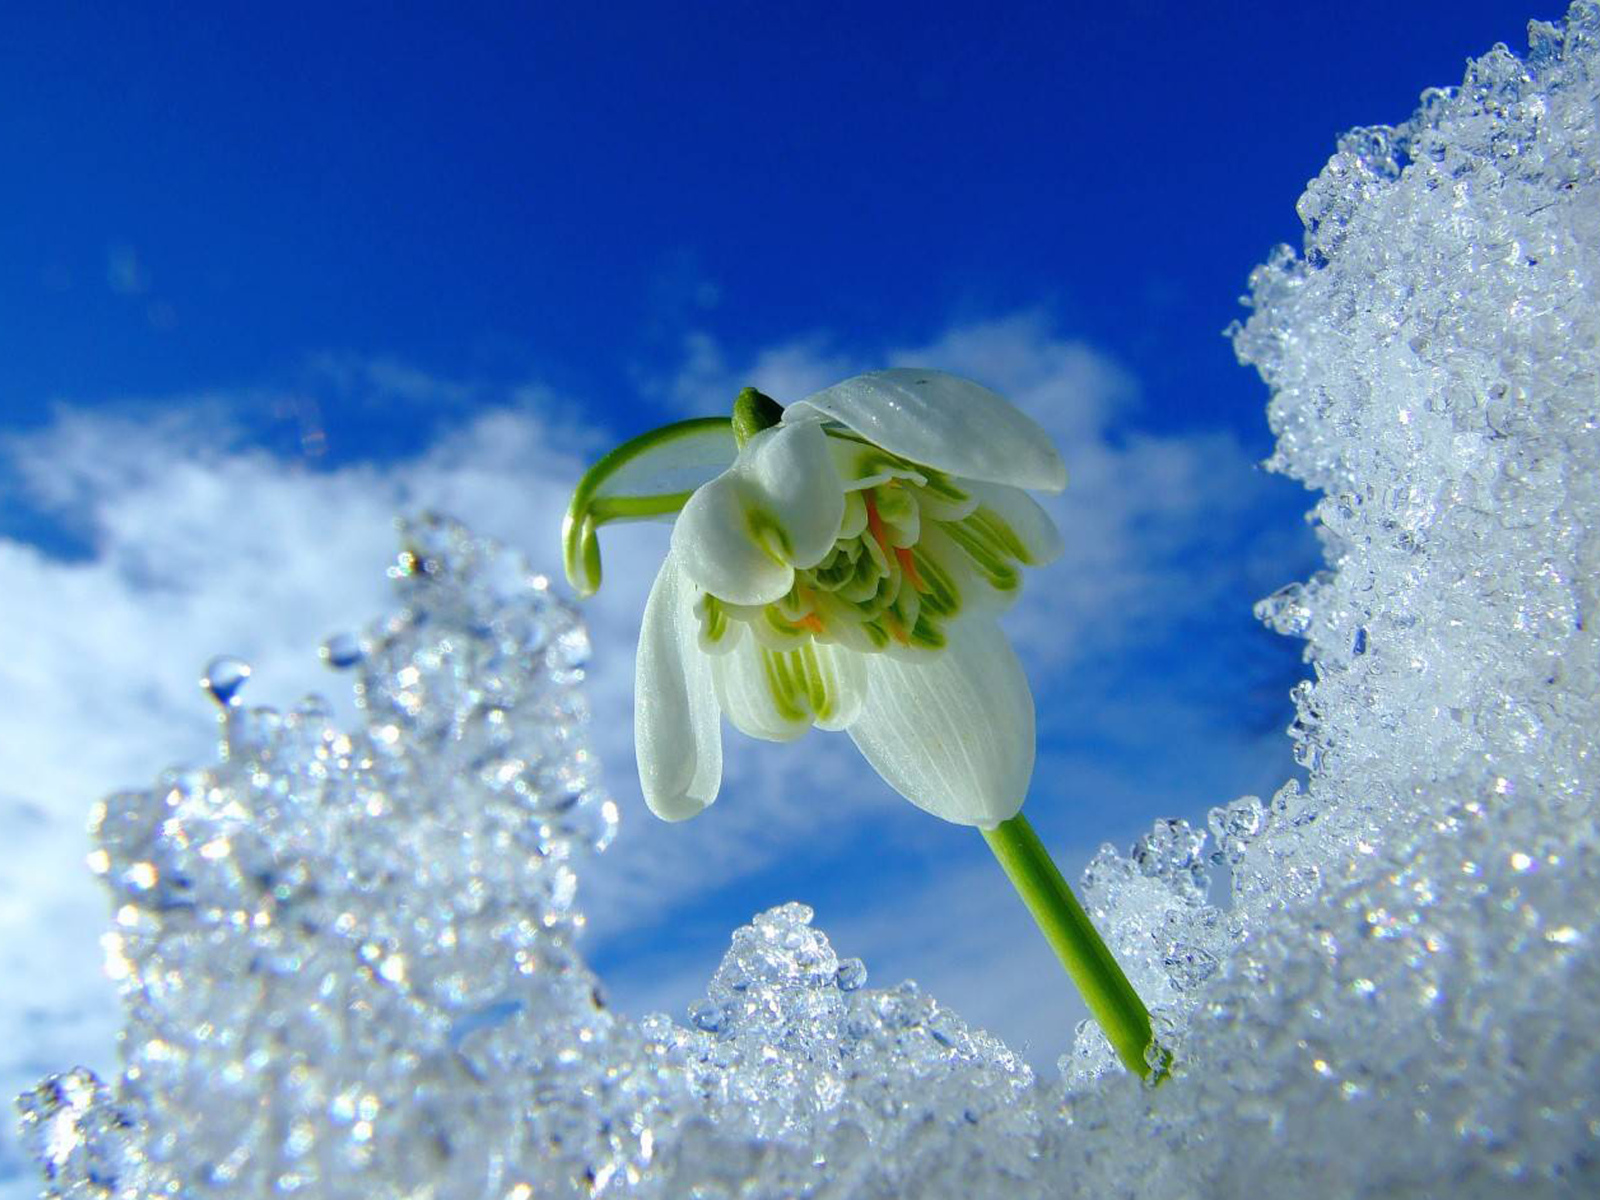 https://www.zastavki.com/pictures/1600x1200/2019Nature___Flowers_The_first_spring_snowdrop_in_the_snow_against_a_blue_sky_130852_2.jpg